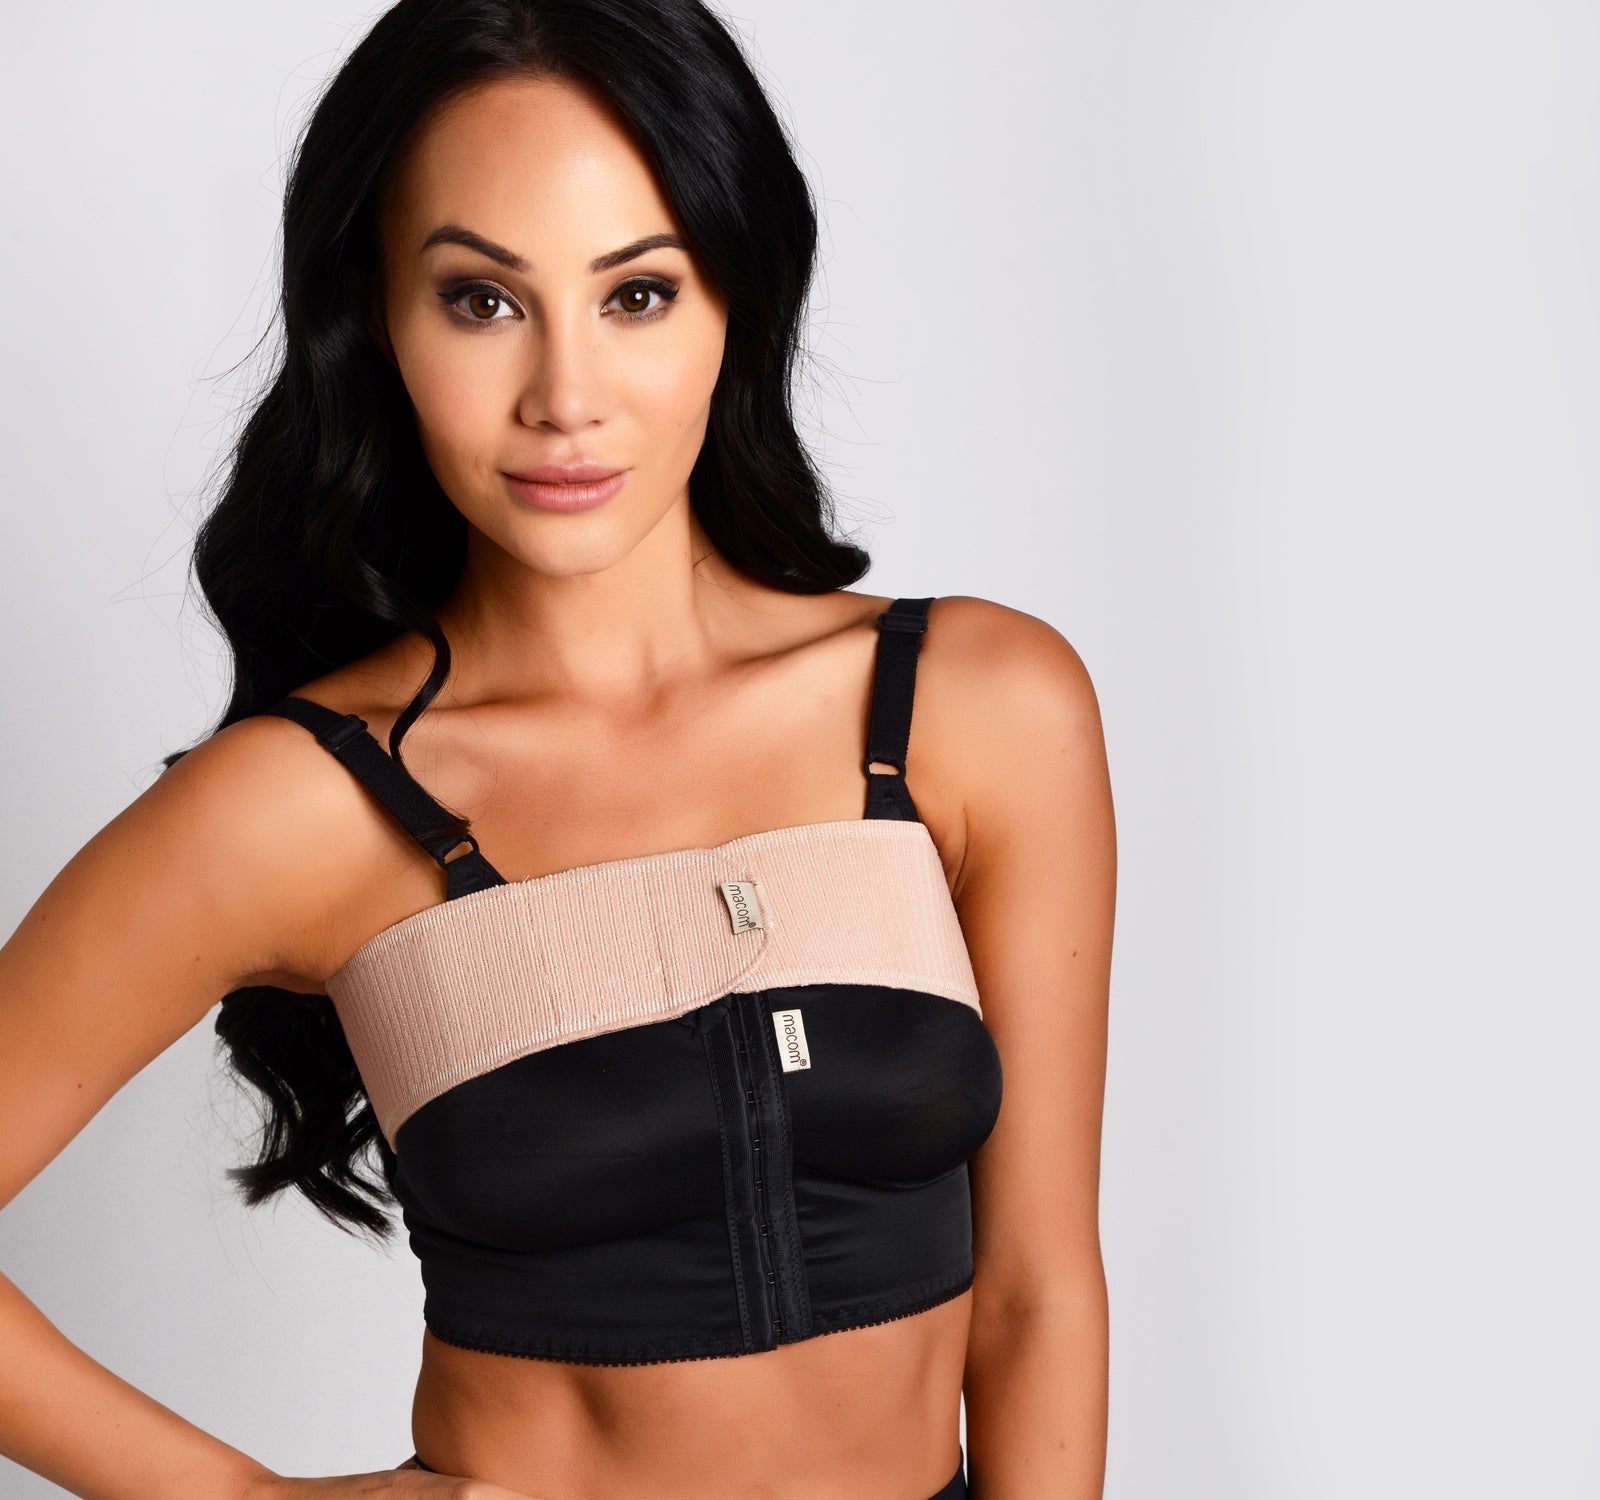 MACOM Signature bra is available in 4 colours - Best seller - Patient and  Surgeon's favourite